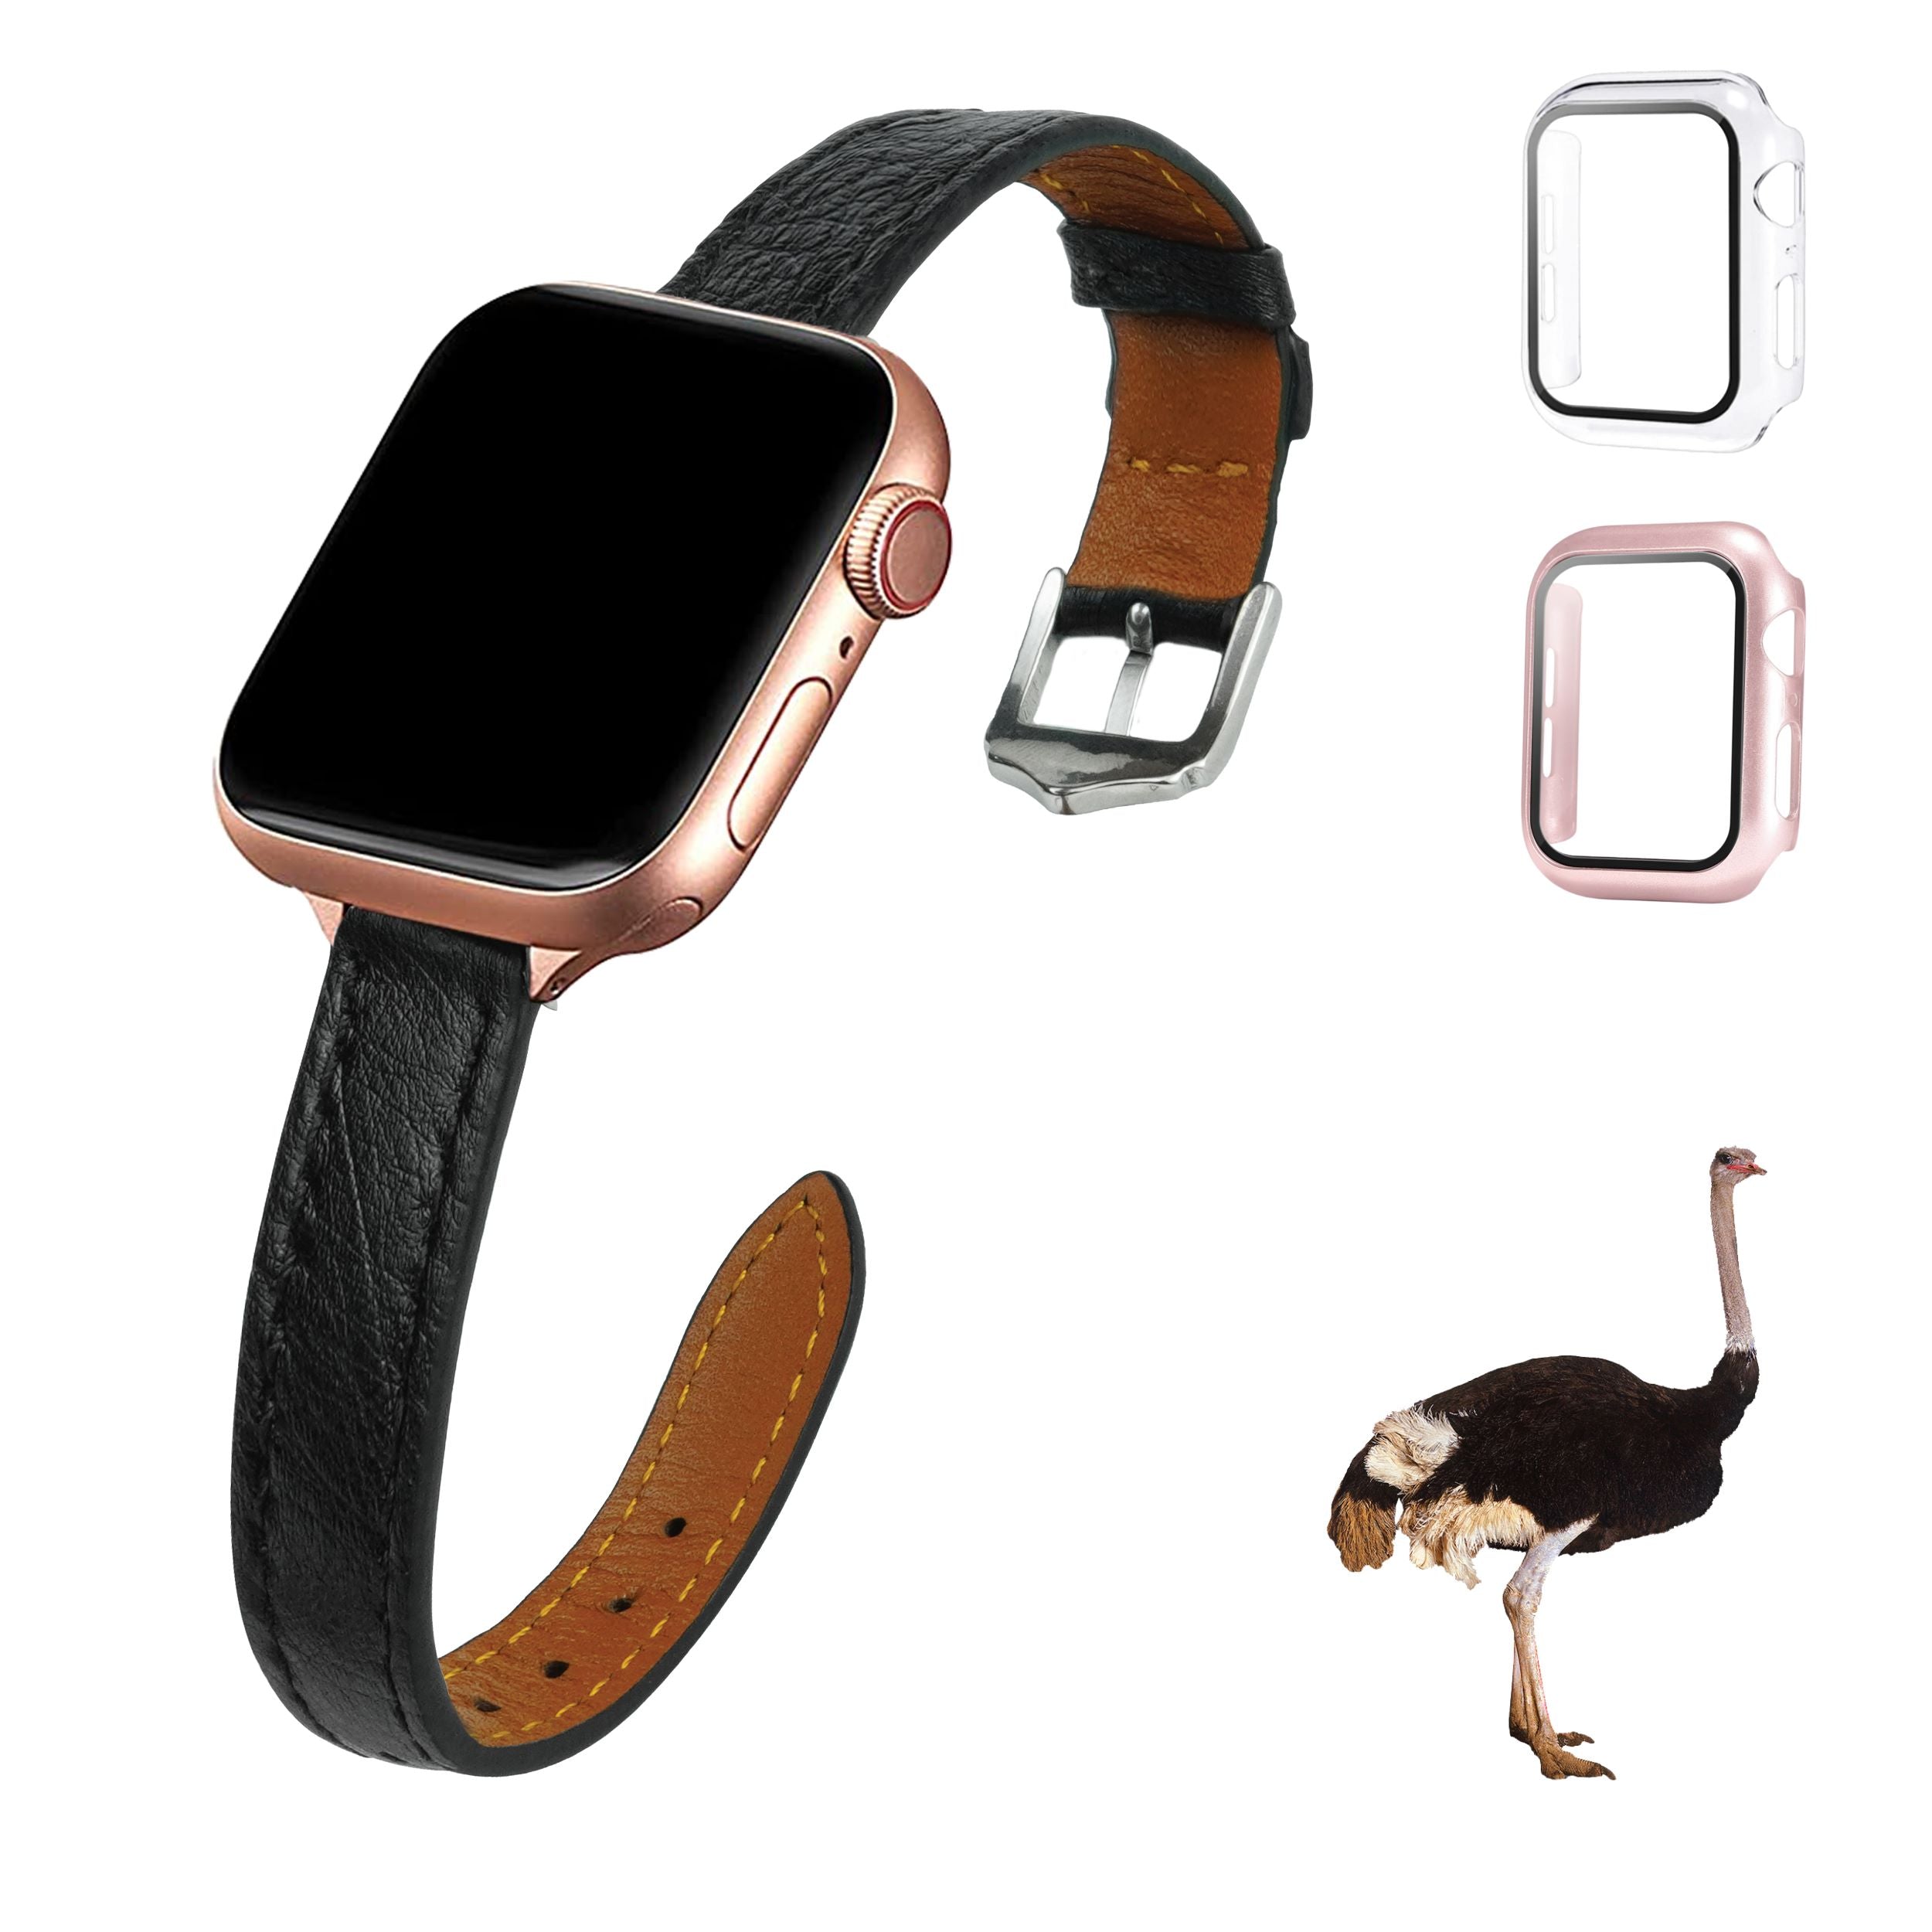 Black Flat Ostrich Leather Band Compatible Apple Watch Iwatch 44mm Screen Protector Case Silver Adapter Replacement Strap For Smartwatch Series 4 5 6 SE Leather Handmade AW-181S-W-44MM